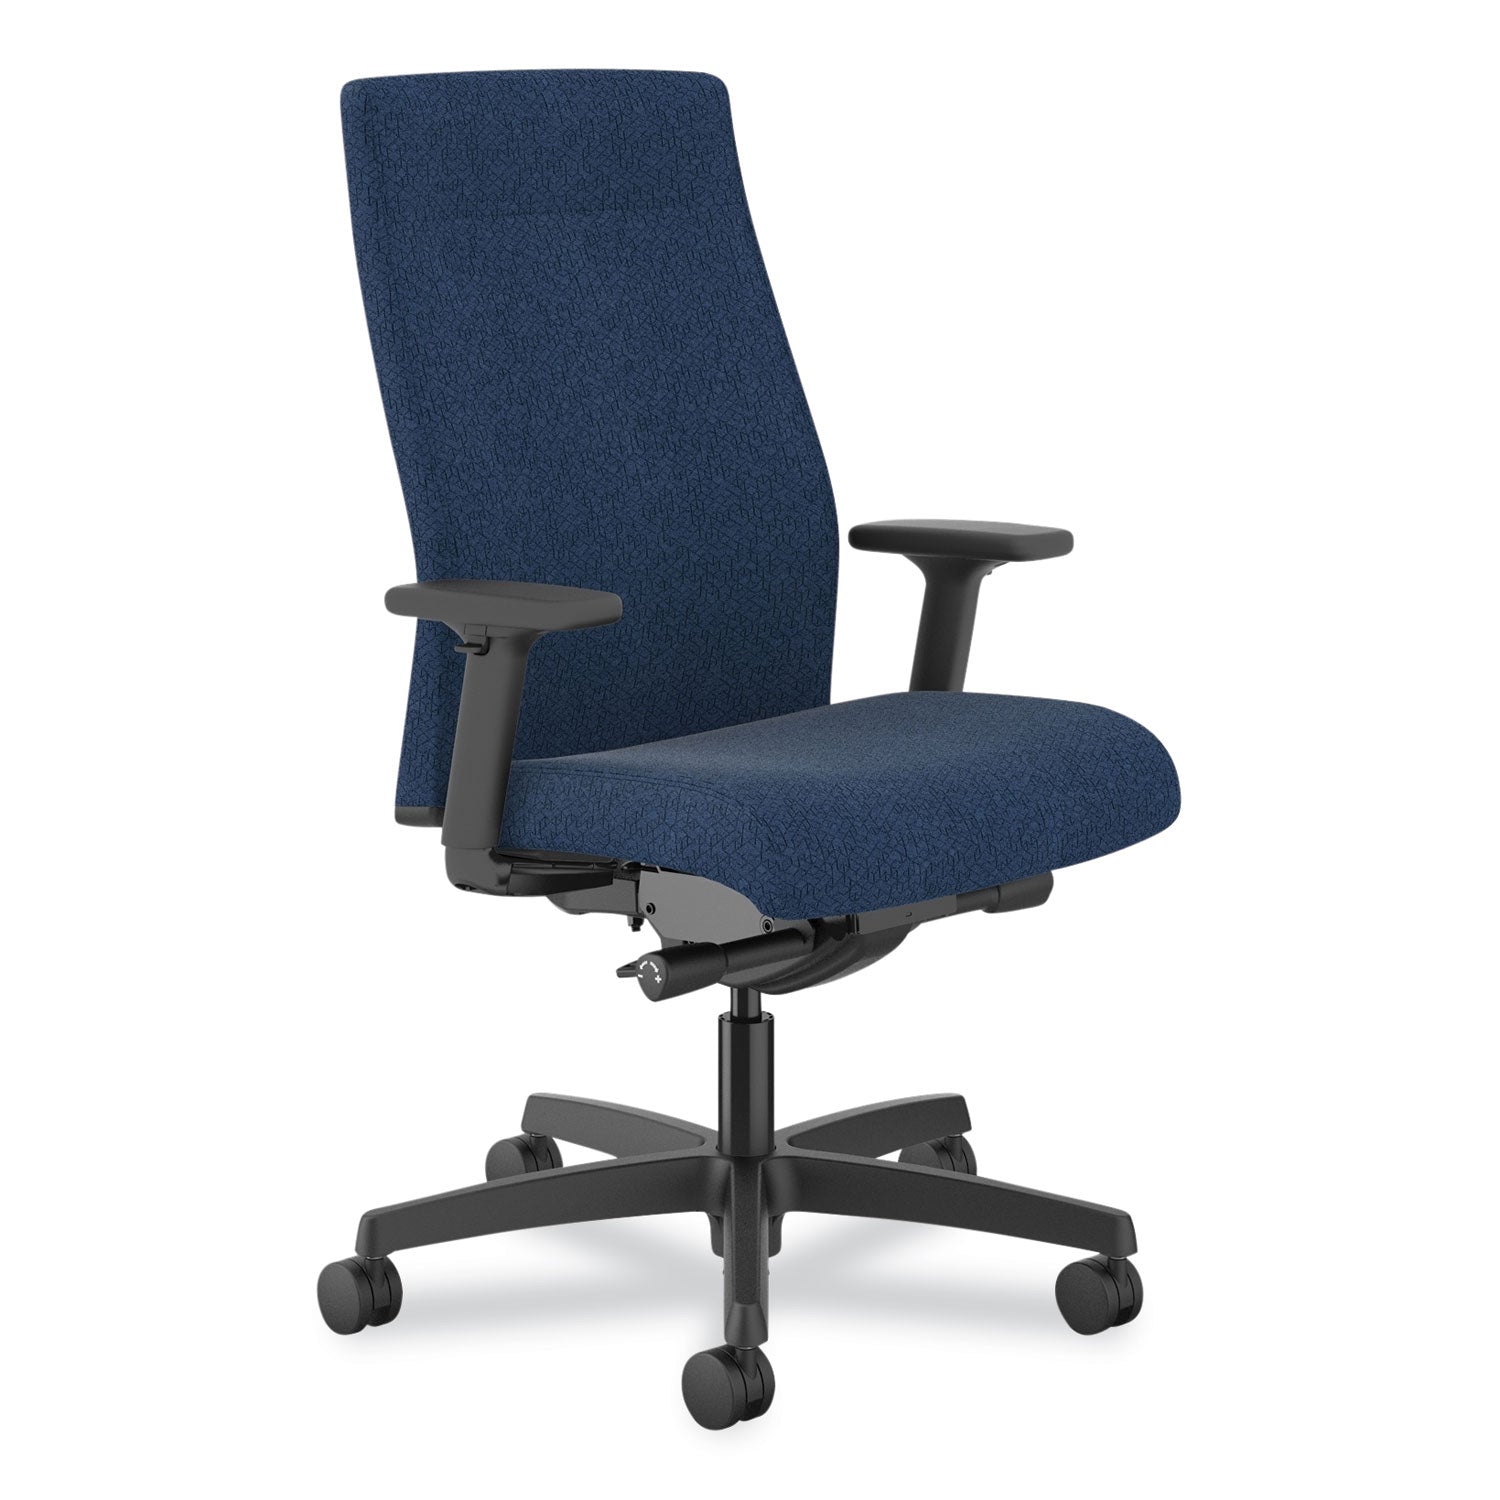 ignition-20-upholstered-mid-back-task-chair-17-to-215-seat-height-navy-fabric-seat-back-ships-in-7-10-business-days_honi2u2ahax13tk - 1